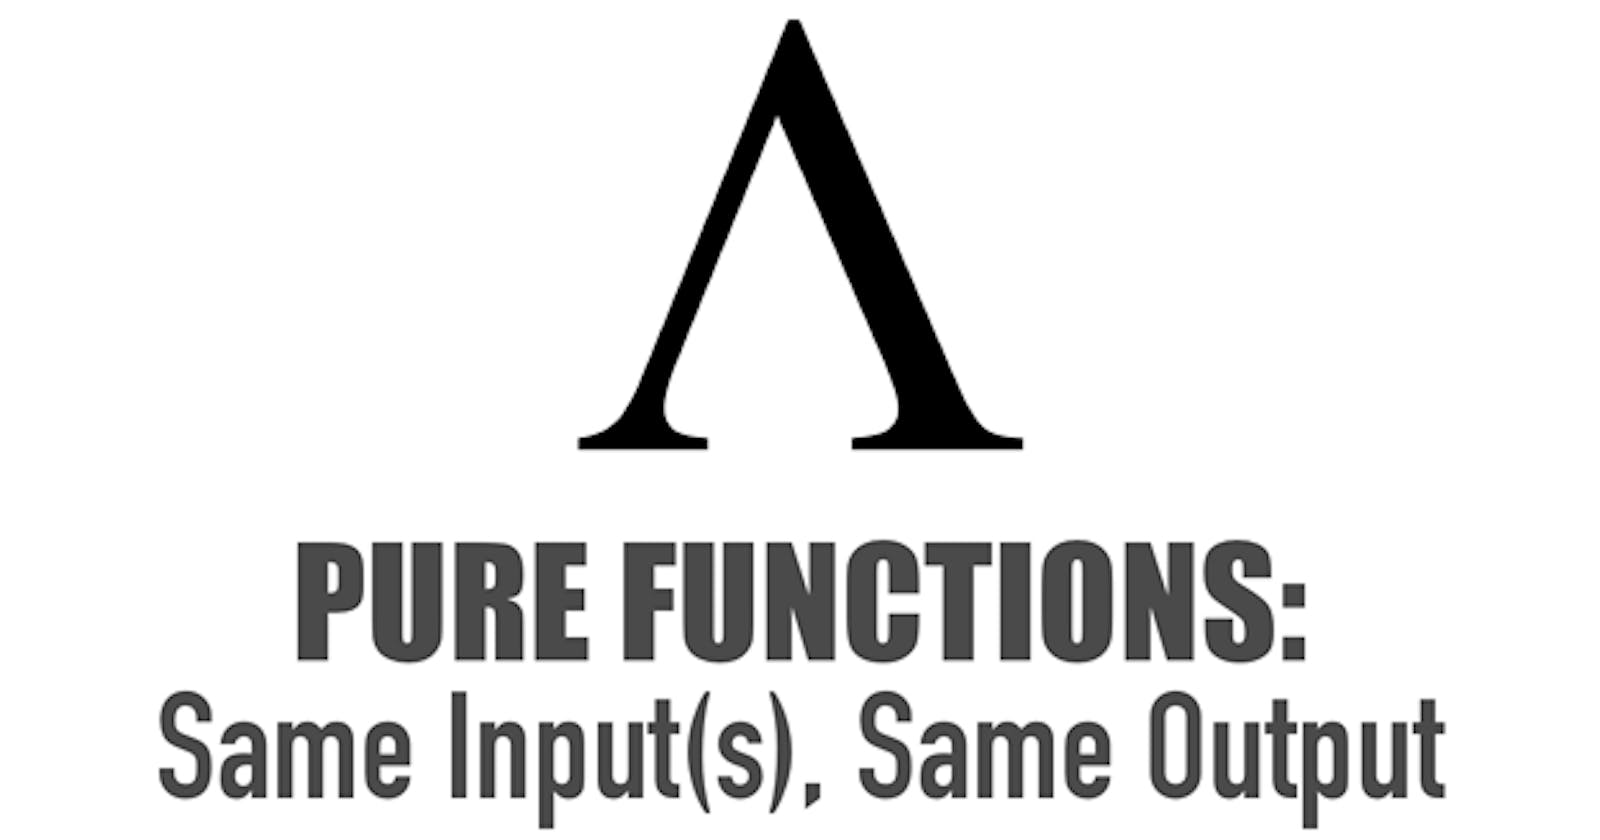 What are Pure Functions in Javascript?